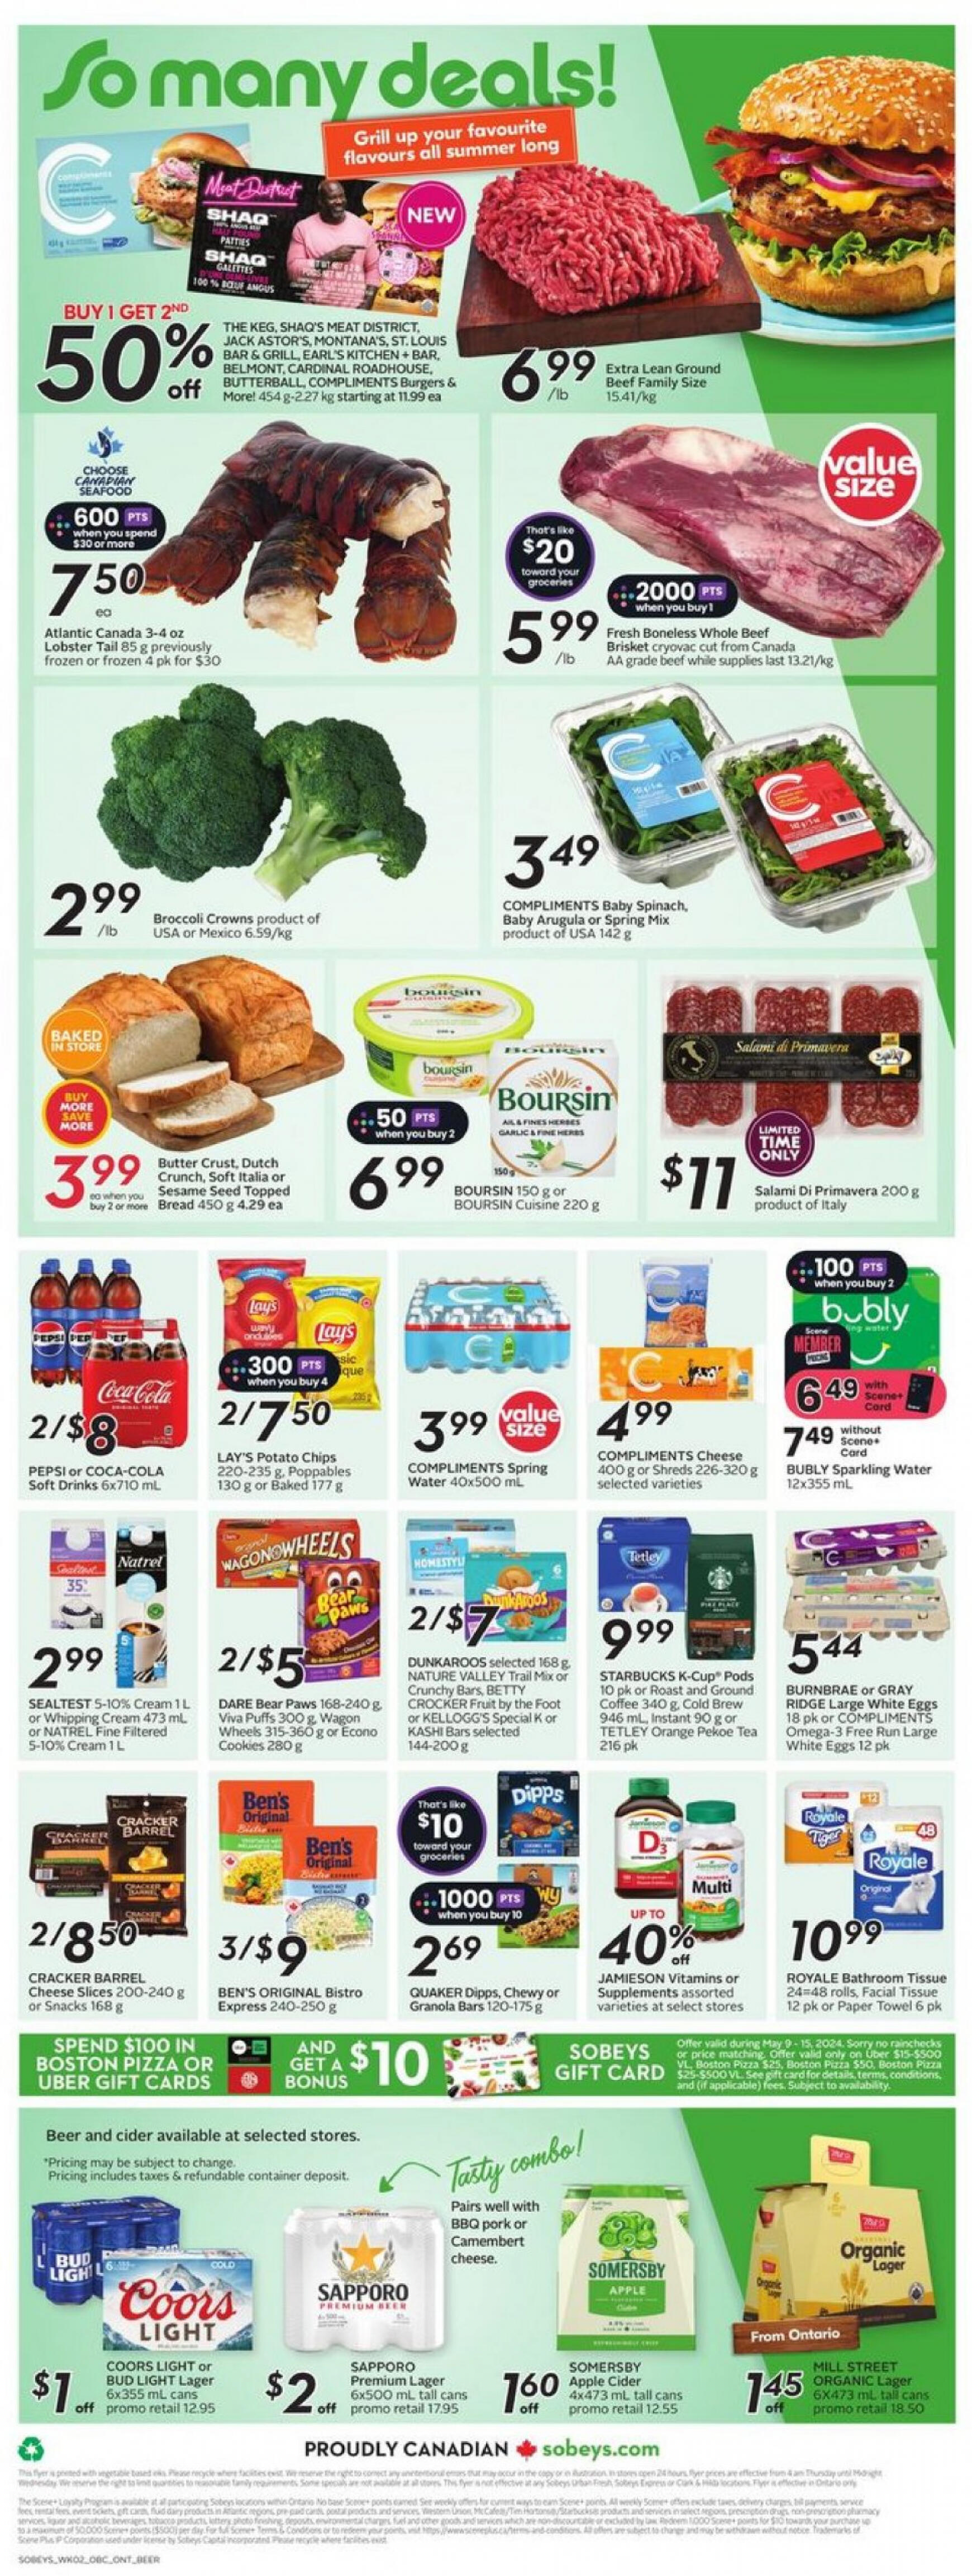 sobeys - Sobeys - Weekly Flyer - Ontario flyer current 09.05. - 15.05. - page: 4